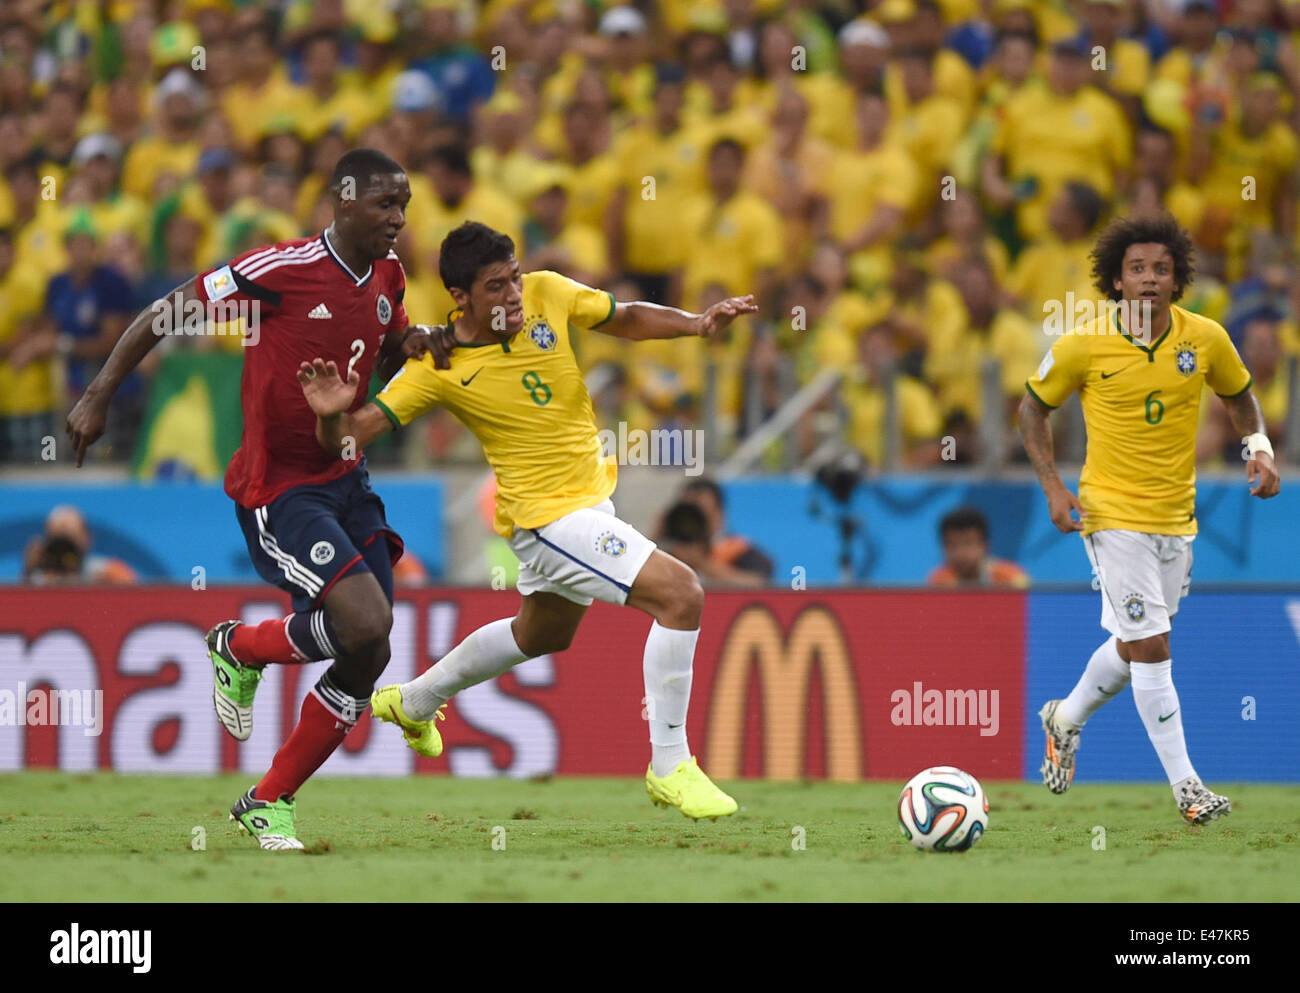 Fortaleza, Brazil. 04th July, 2014. Paulinho (C) of Brazil and Cristian Zapata (L) of Colombia vie for the ball during the FIFA World Cup 2014 quarter final match soccer between Brazil and Colombia at the Estadio Castelao in Fortaleza, Brazil, 04 July 2014. Photo: Marius Becker/dpa/Alamy Live News Stock Photo